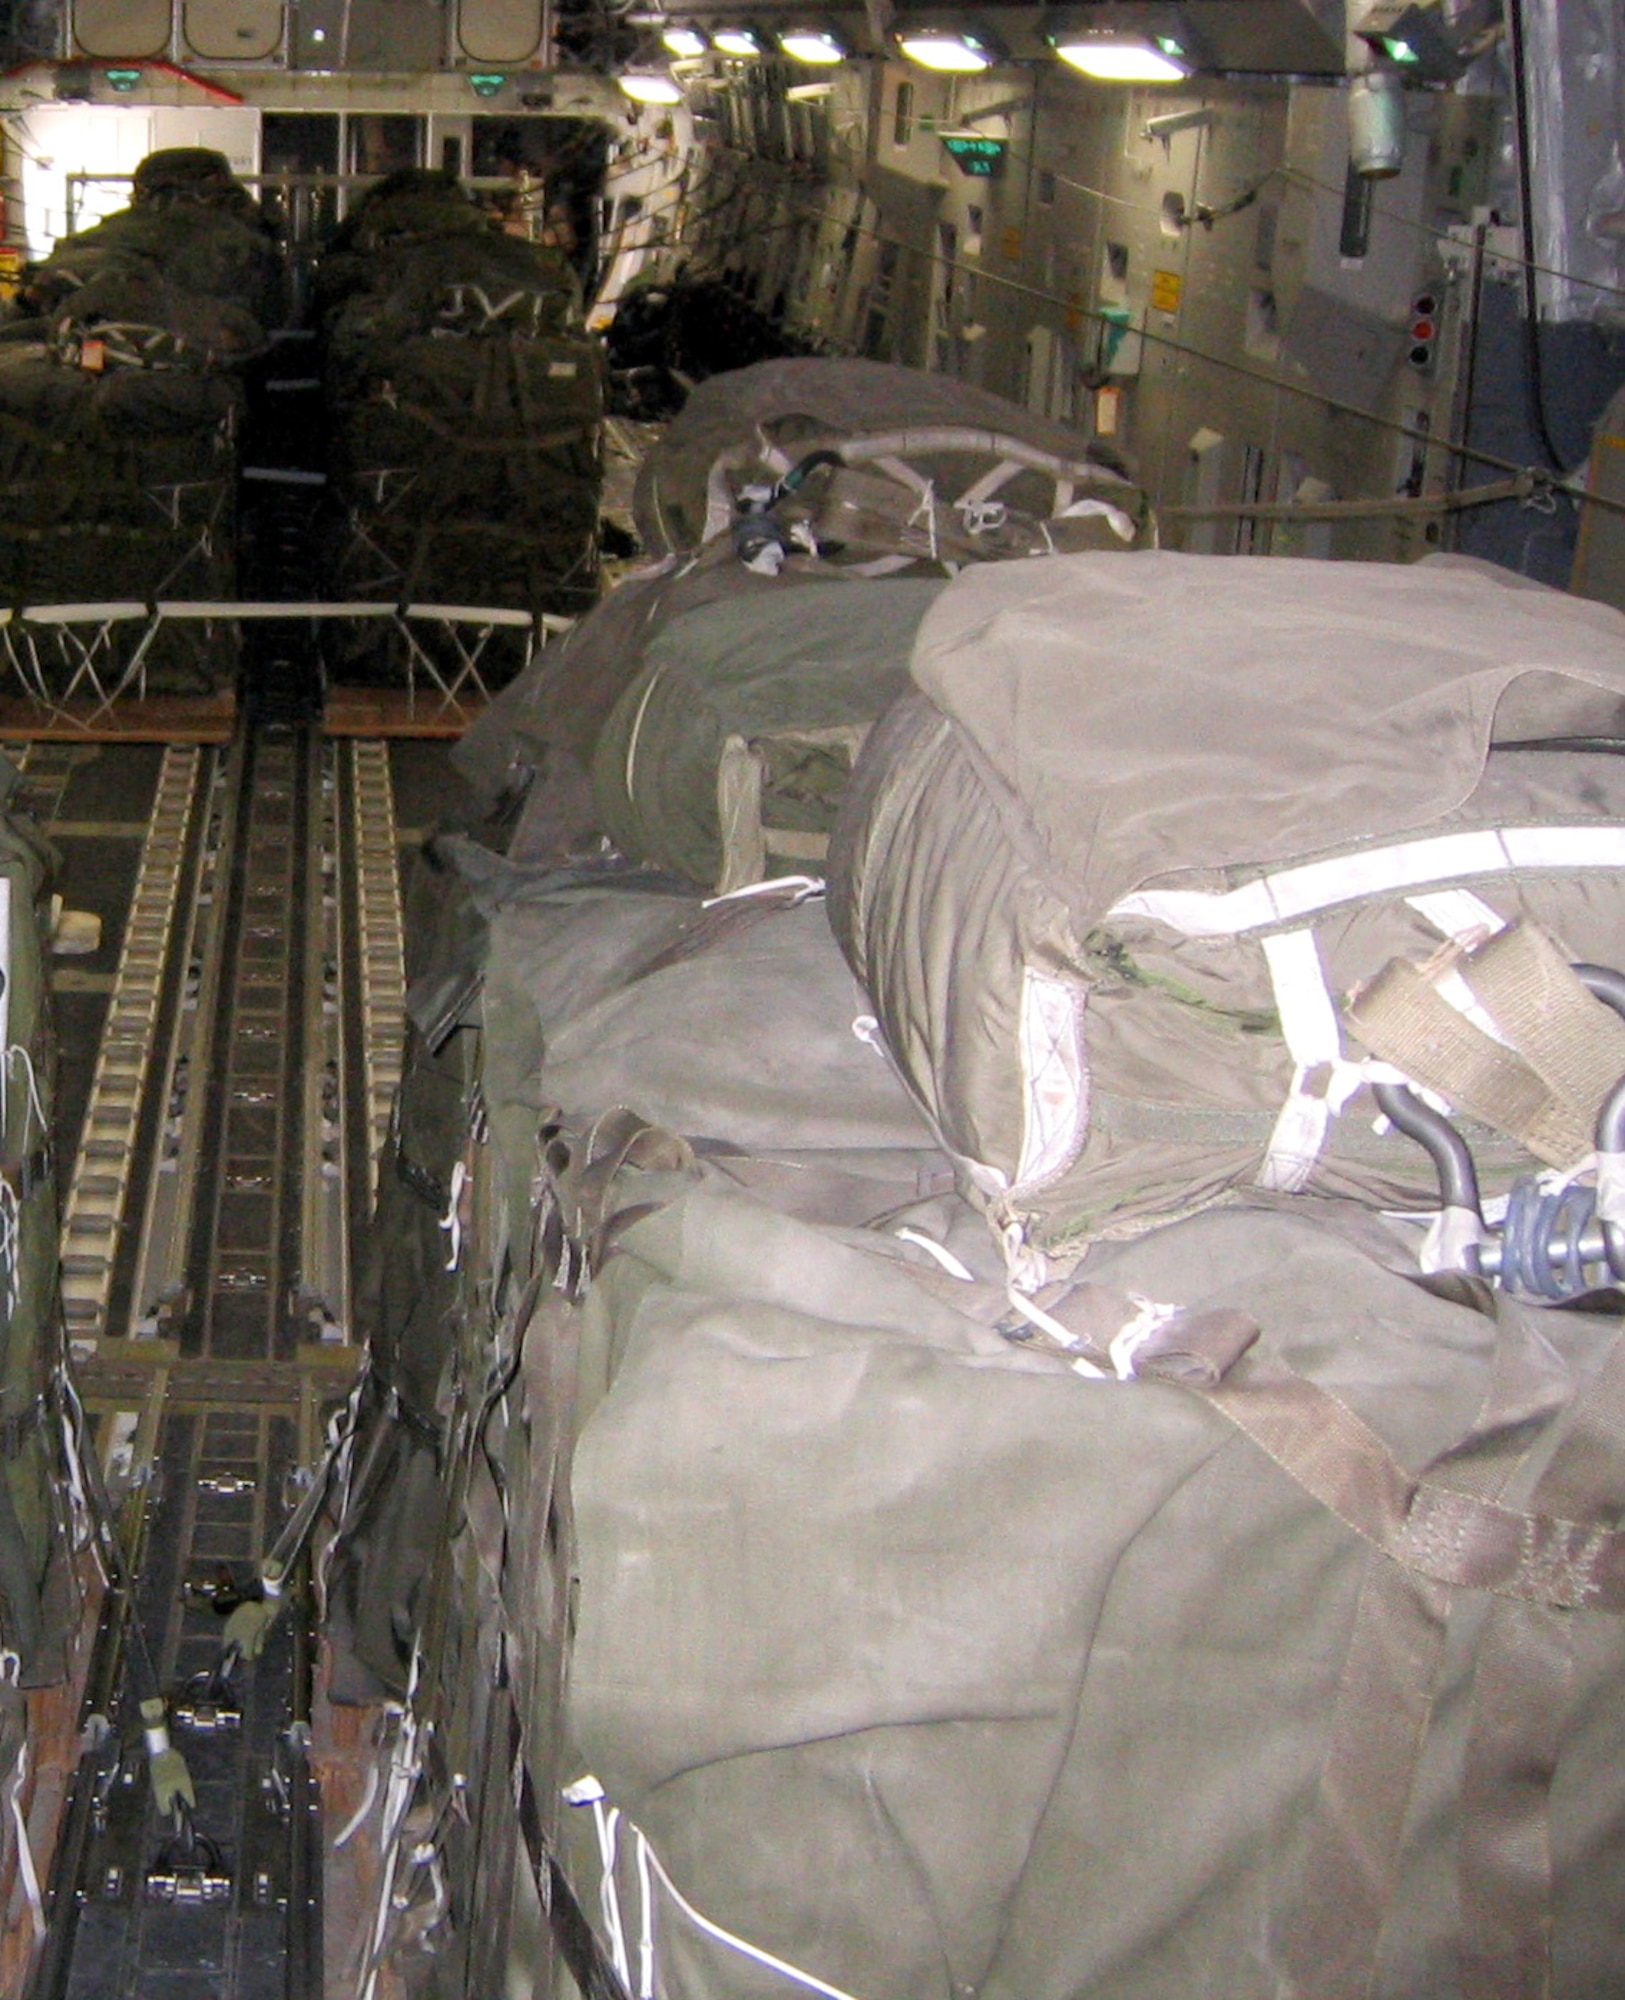 Pallets of humanitarian aid sit aboard an Air Force C-17 Globemaster III that airdropped 32,400 pounds of humanitarian aid within 40 minutes to four locations in central and eastern Afghanistan Thursday, March 16, 2006. The C-17 and accompanying aircrew are deployed to the 379th Air Expeditionary Wing at a forward-deployed location from McChord Air Force Base, Wash. (U.S. Air Force photo/Maj. Gabriel Greiss)

